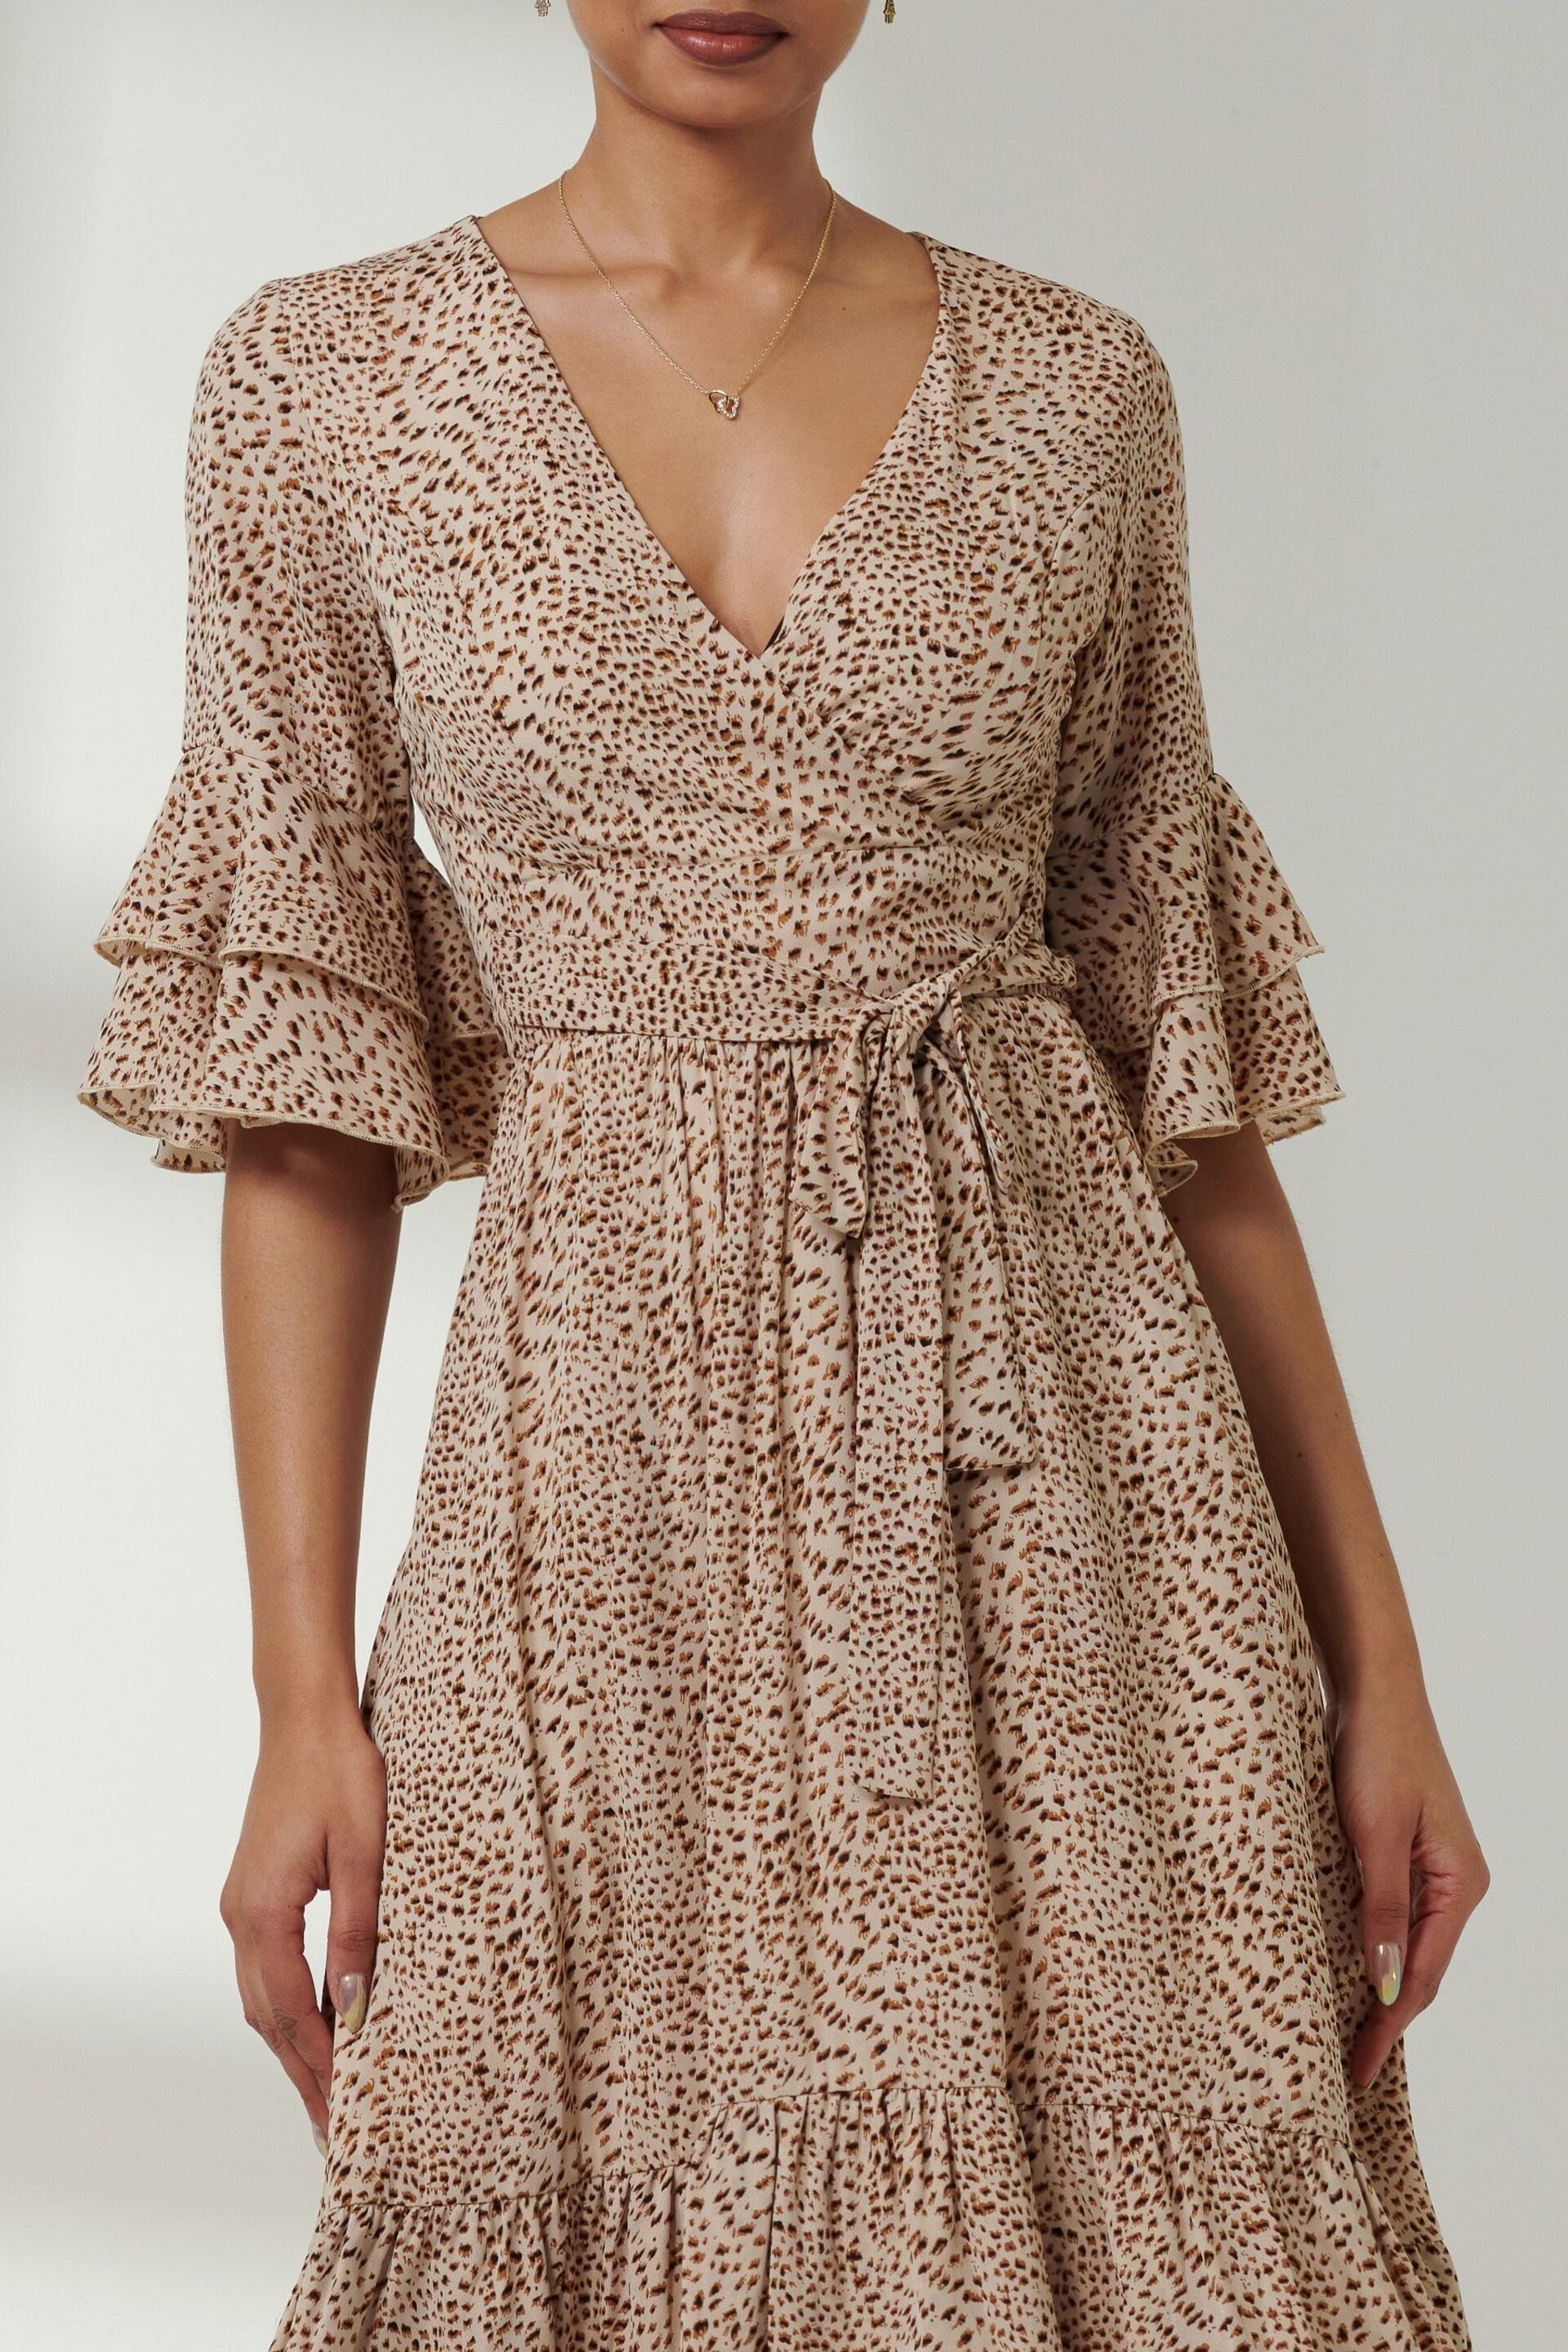 Jolie Moi Brown Tiered Detail Smock Dress - Image 6 of 6